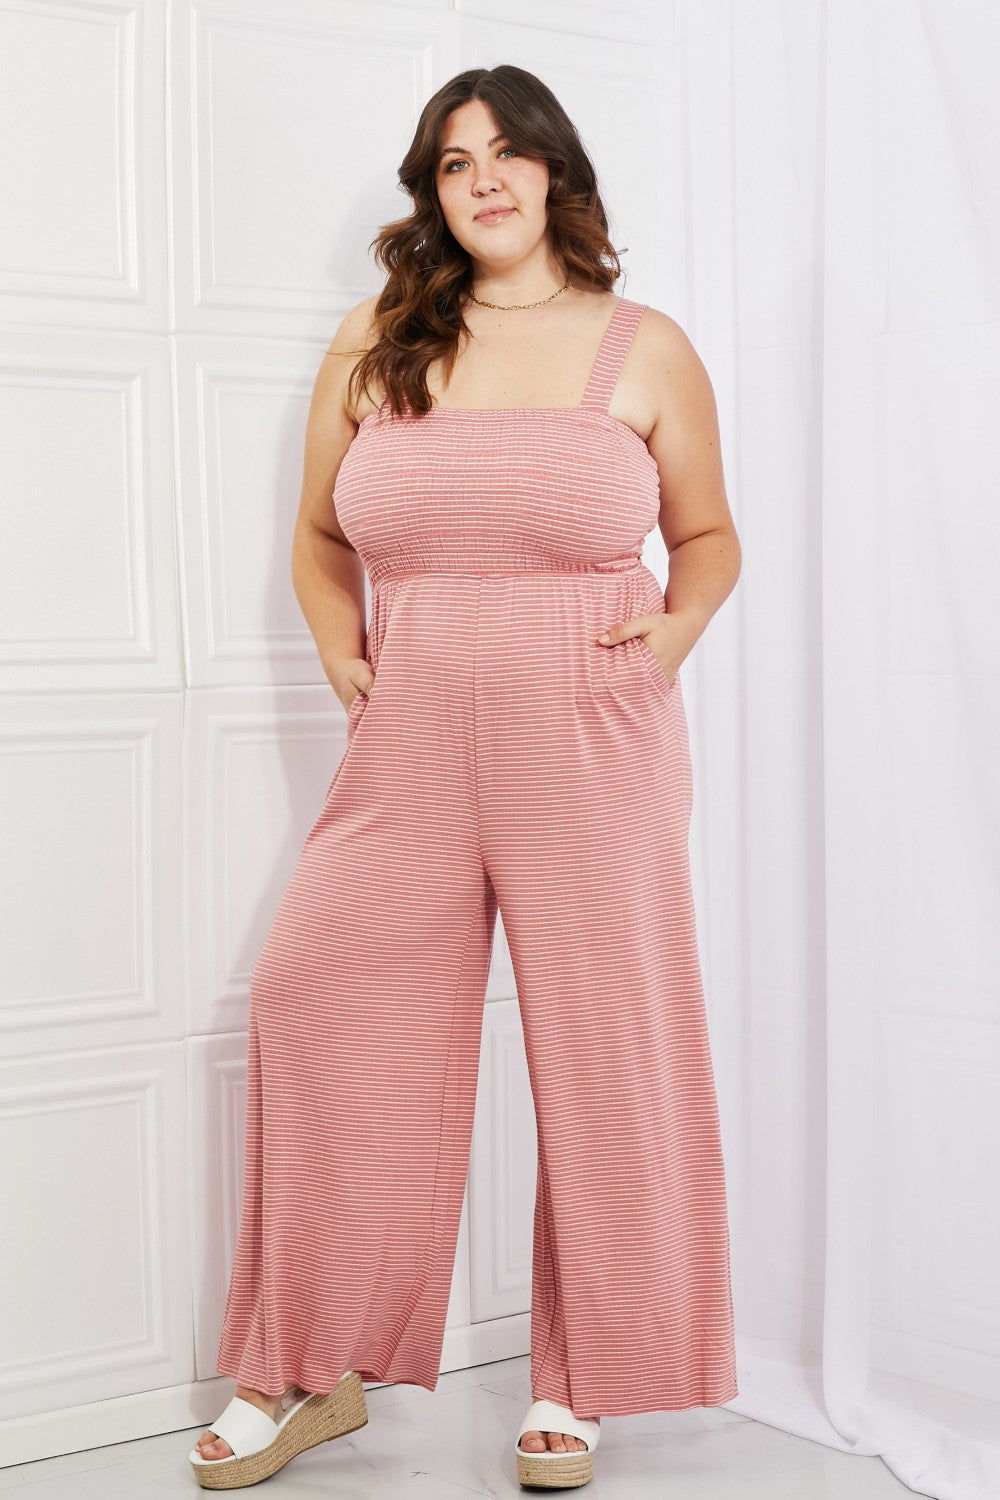 Only Exception Striped Jumpsuit